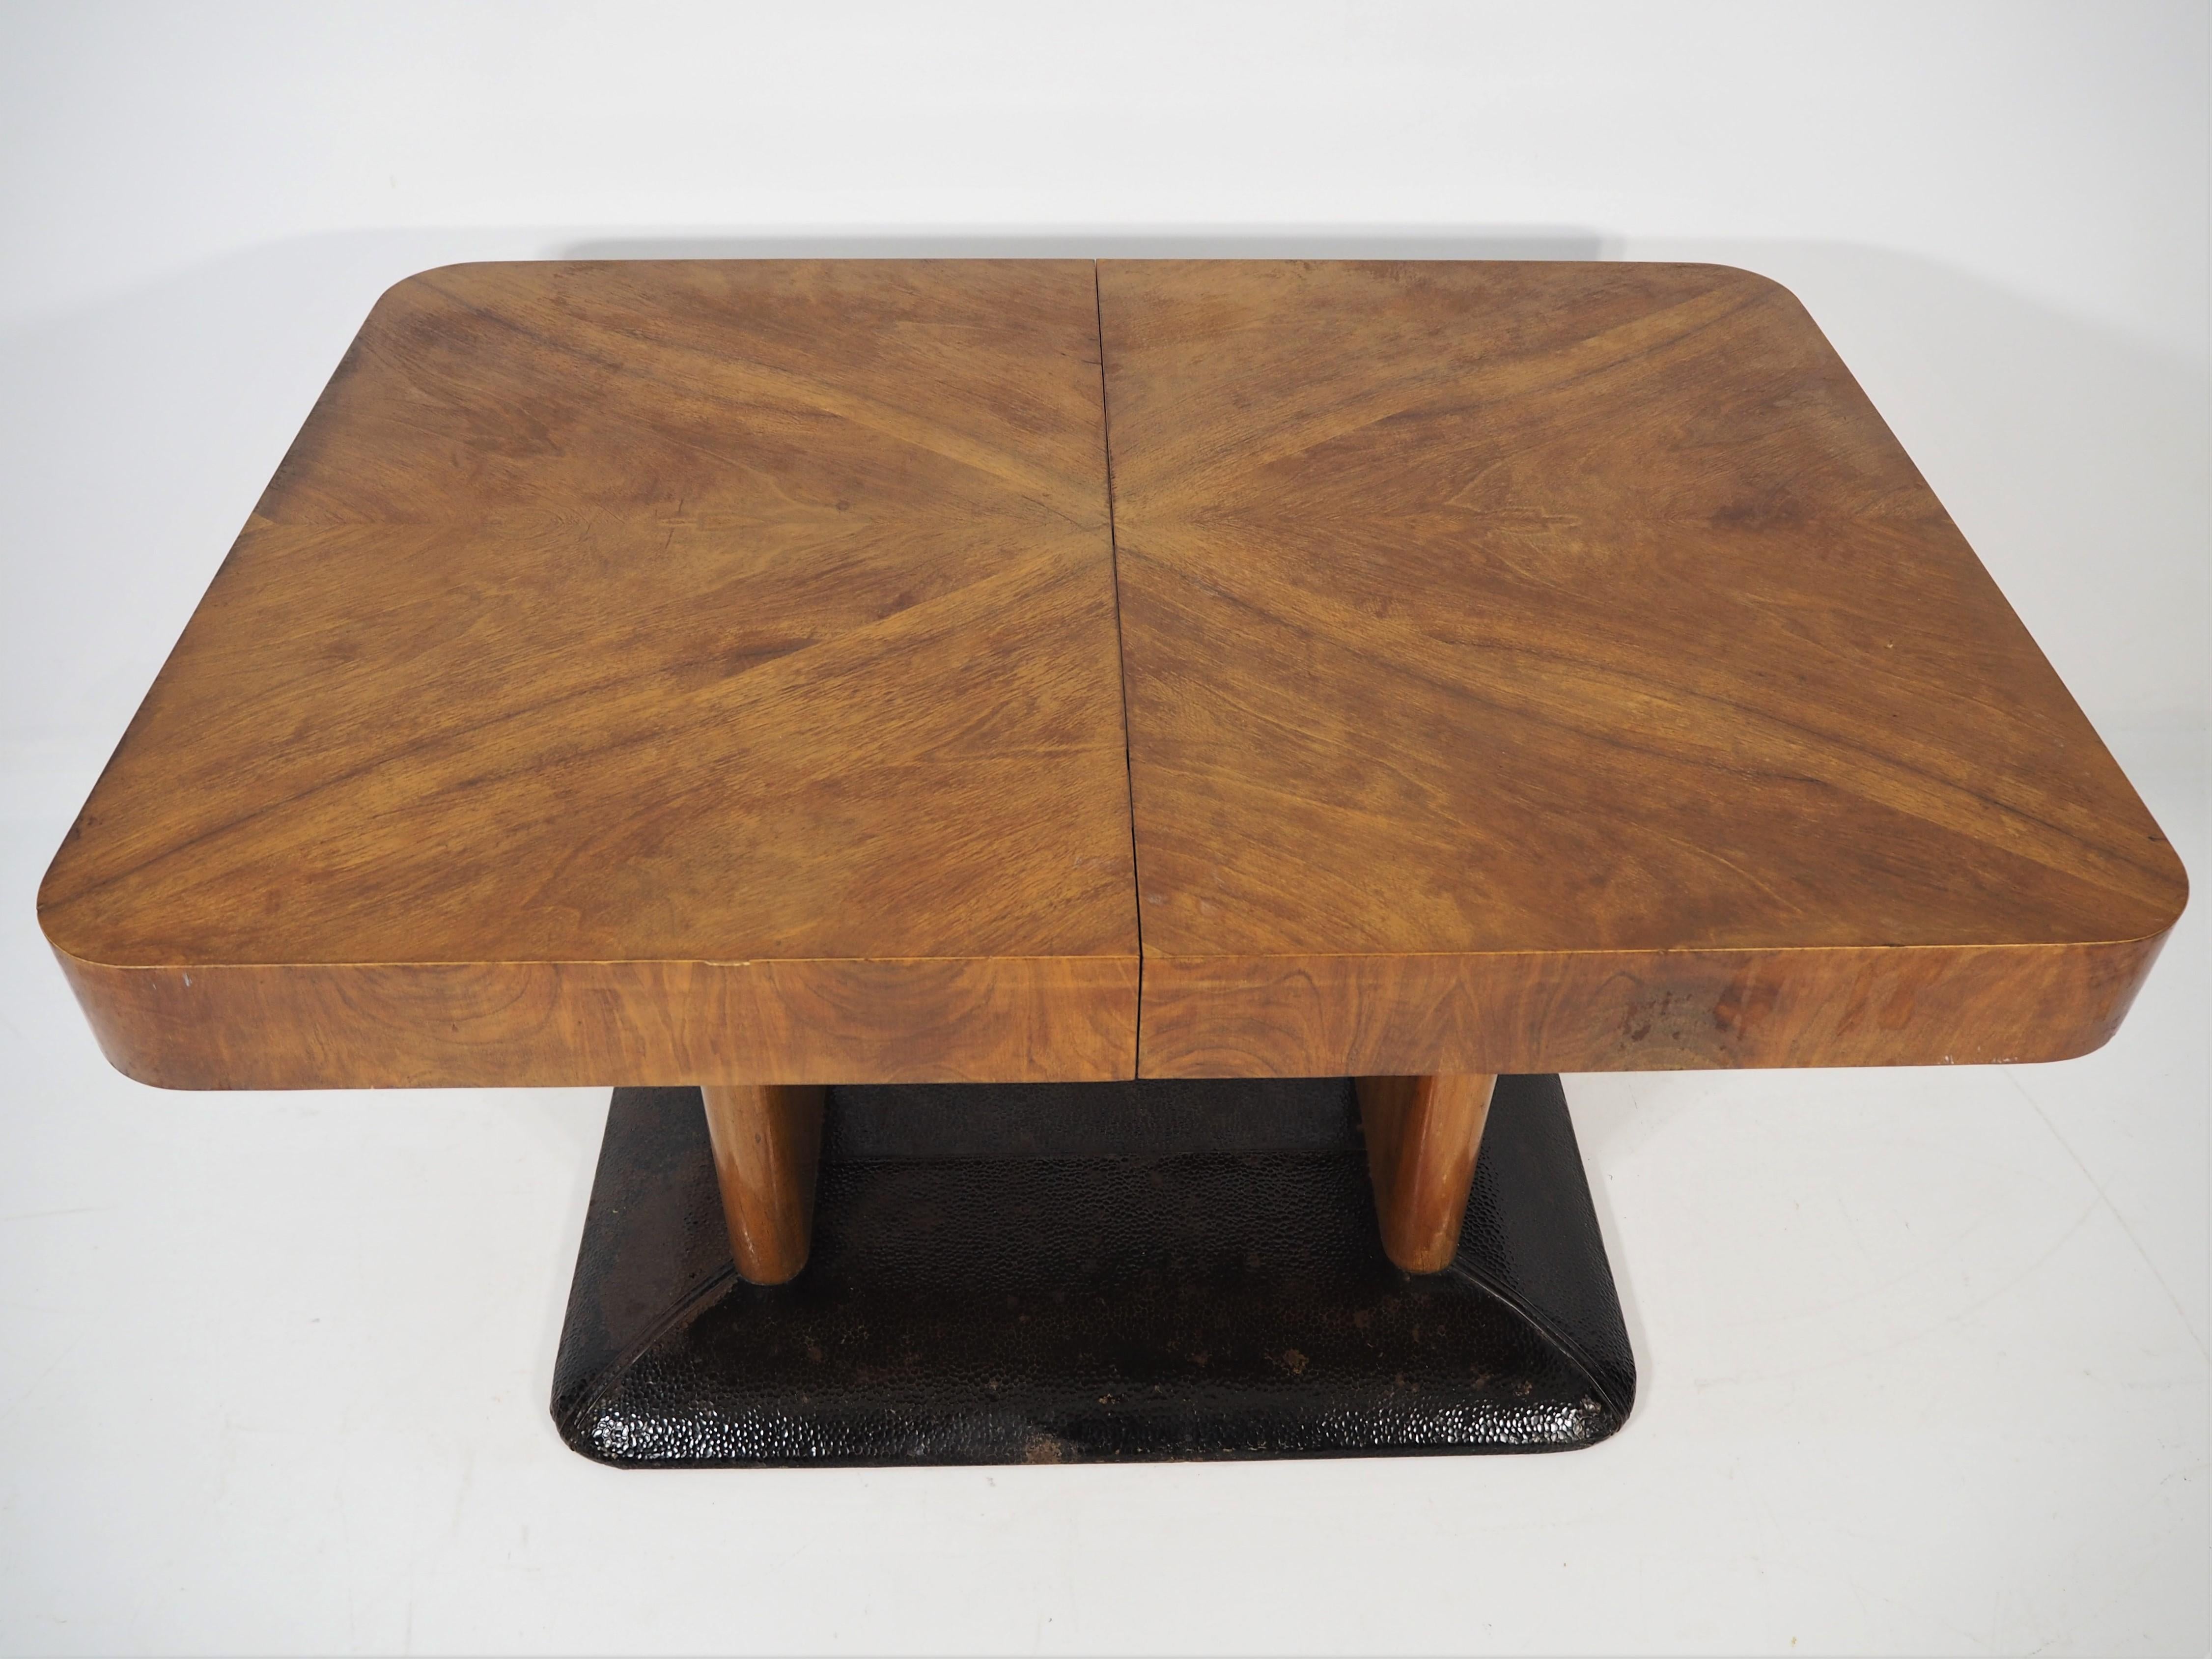 Art Deco walnut table. This table was designed and made in the circa 1940s in the former Czechoslovakia. The material is walnut veneer. Dimensions: Height 76 cm, length 120 cm, width 85 cm. Very good craftsmanship and fully functional. Unfolded